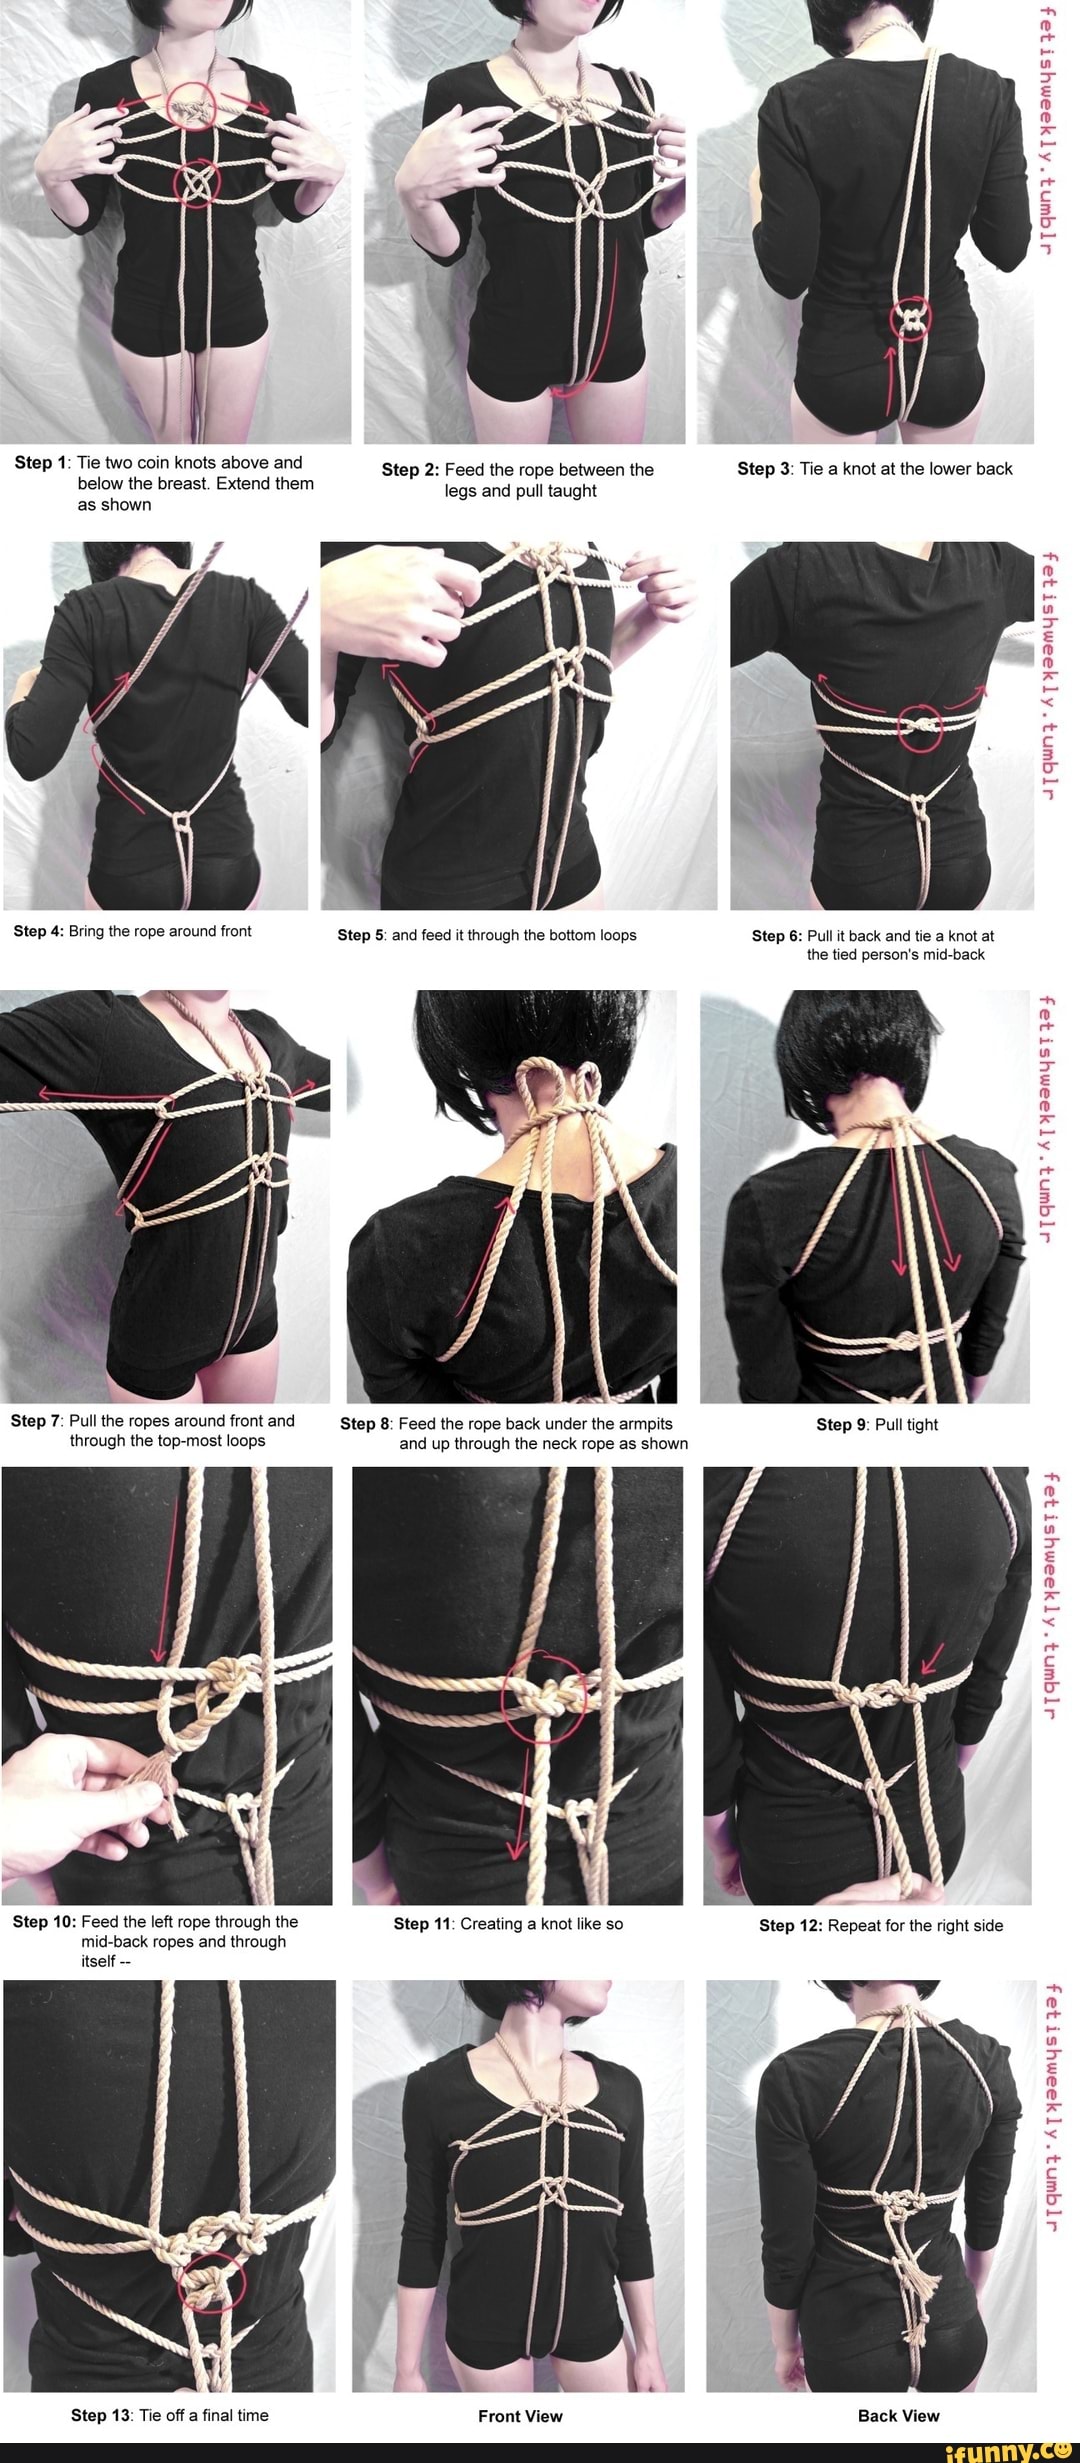 How To Tie Breasts